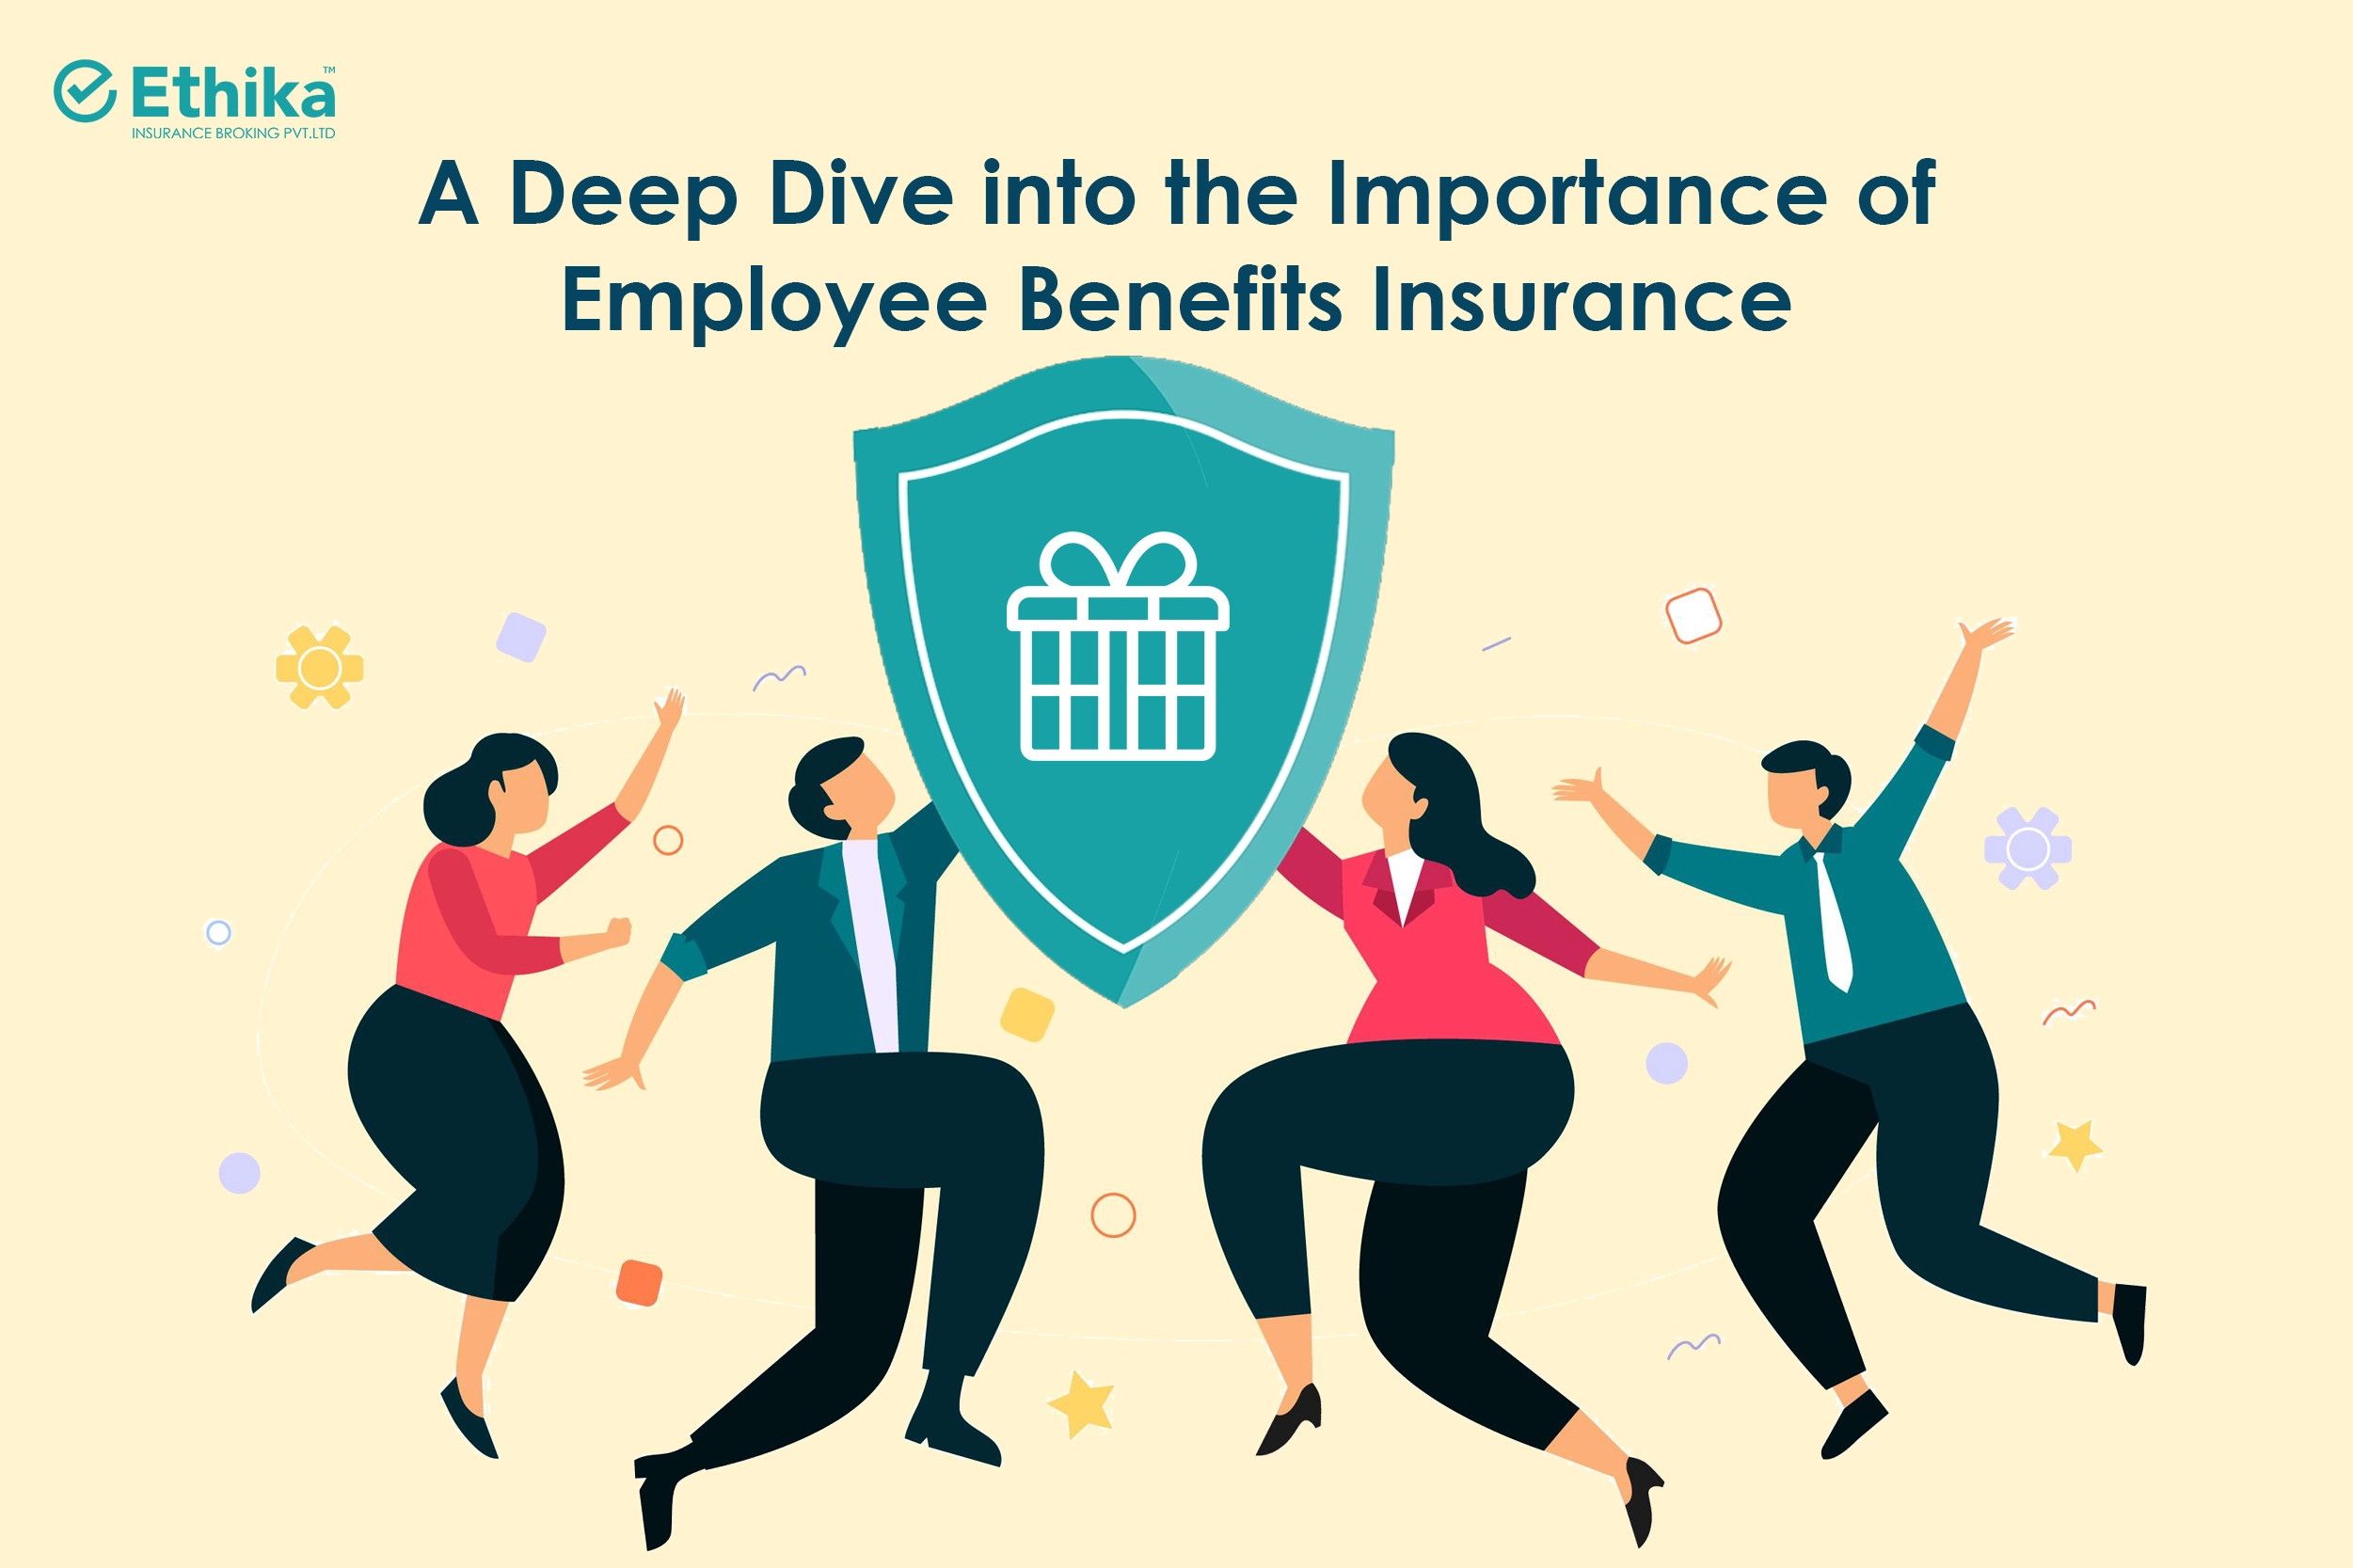 A Deep Dive into the Importance of Employee Benefits Insurance